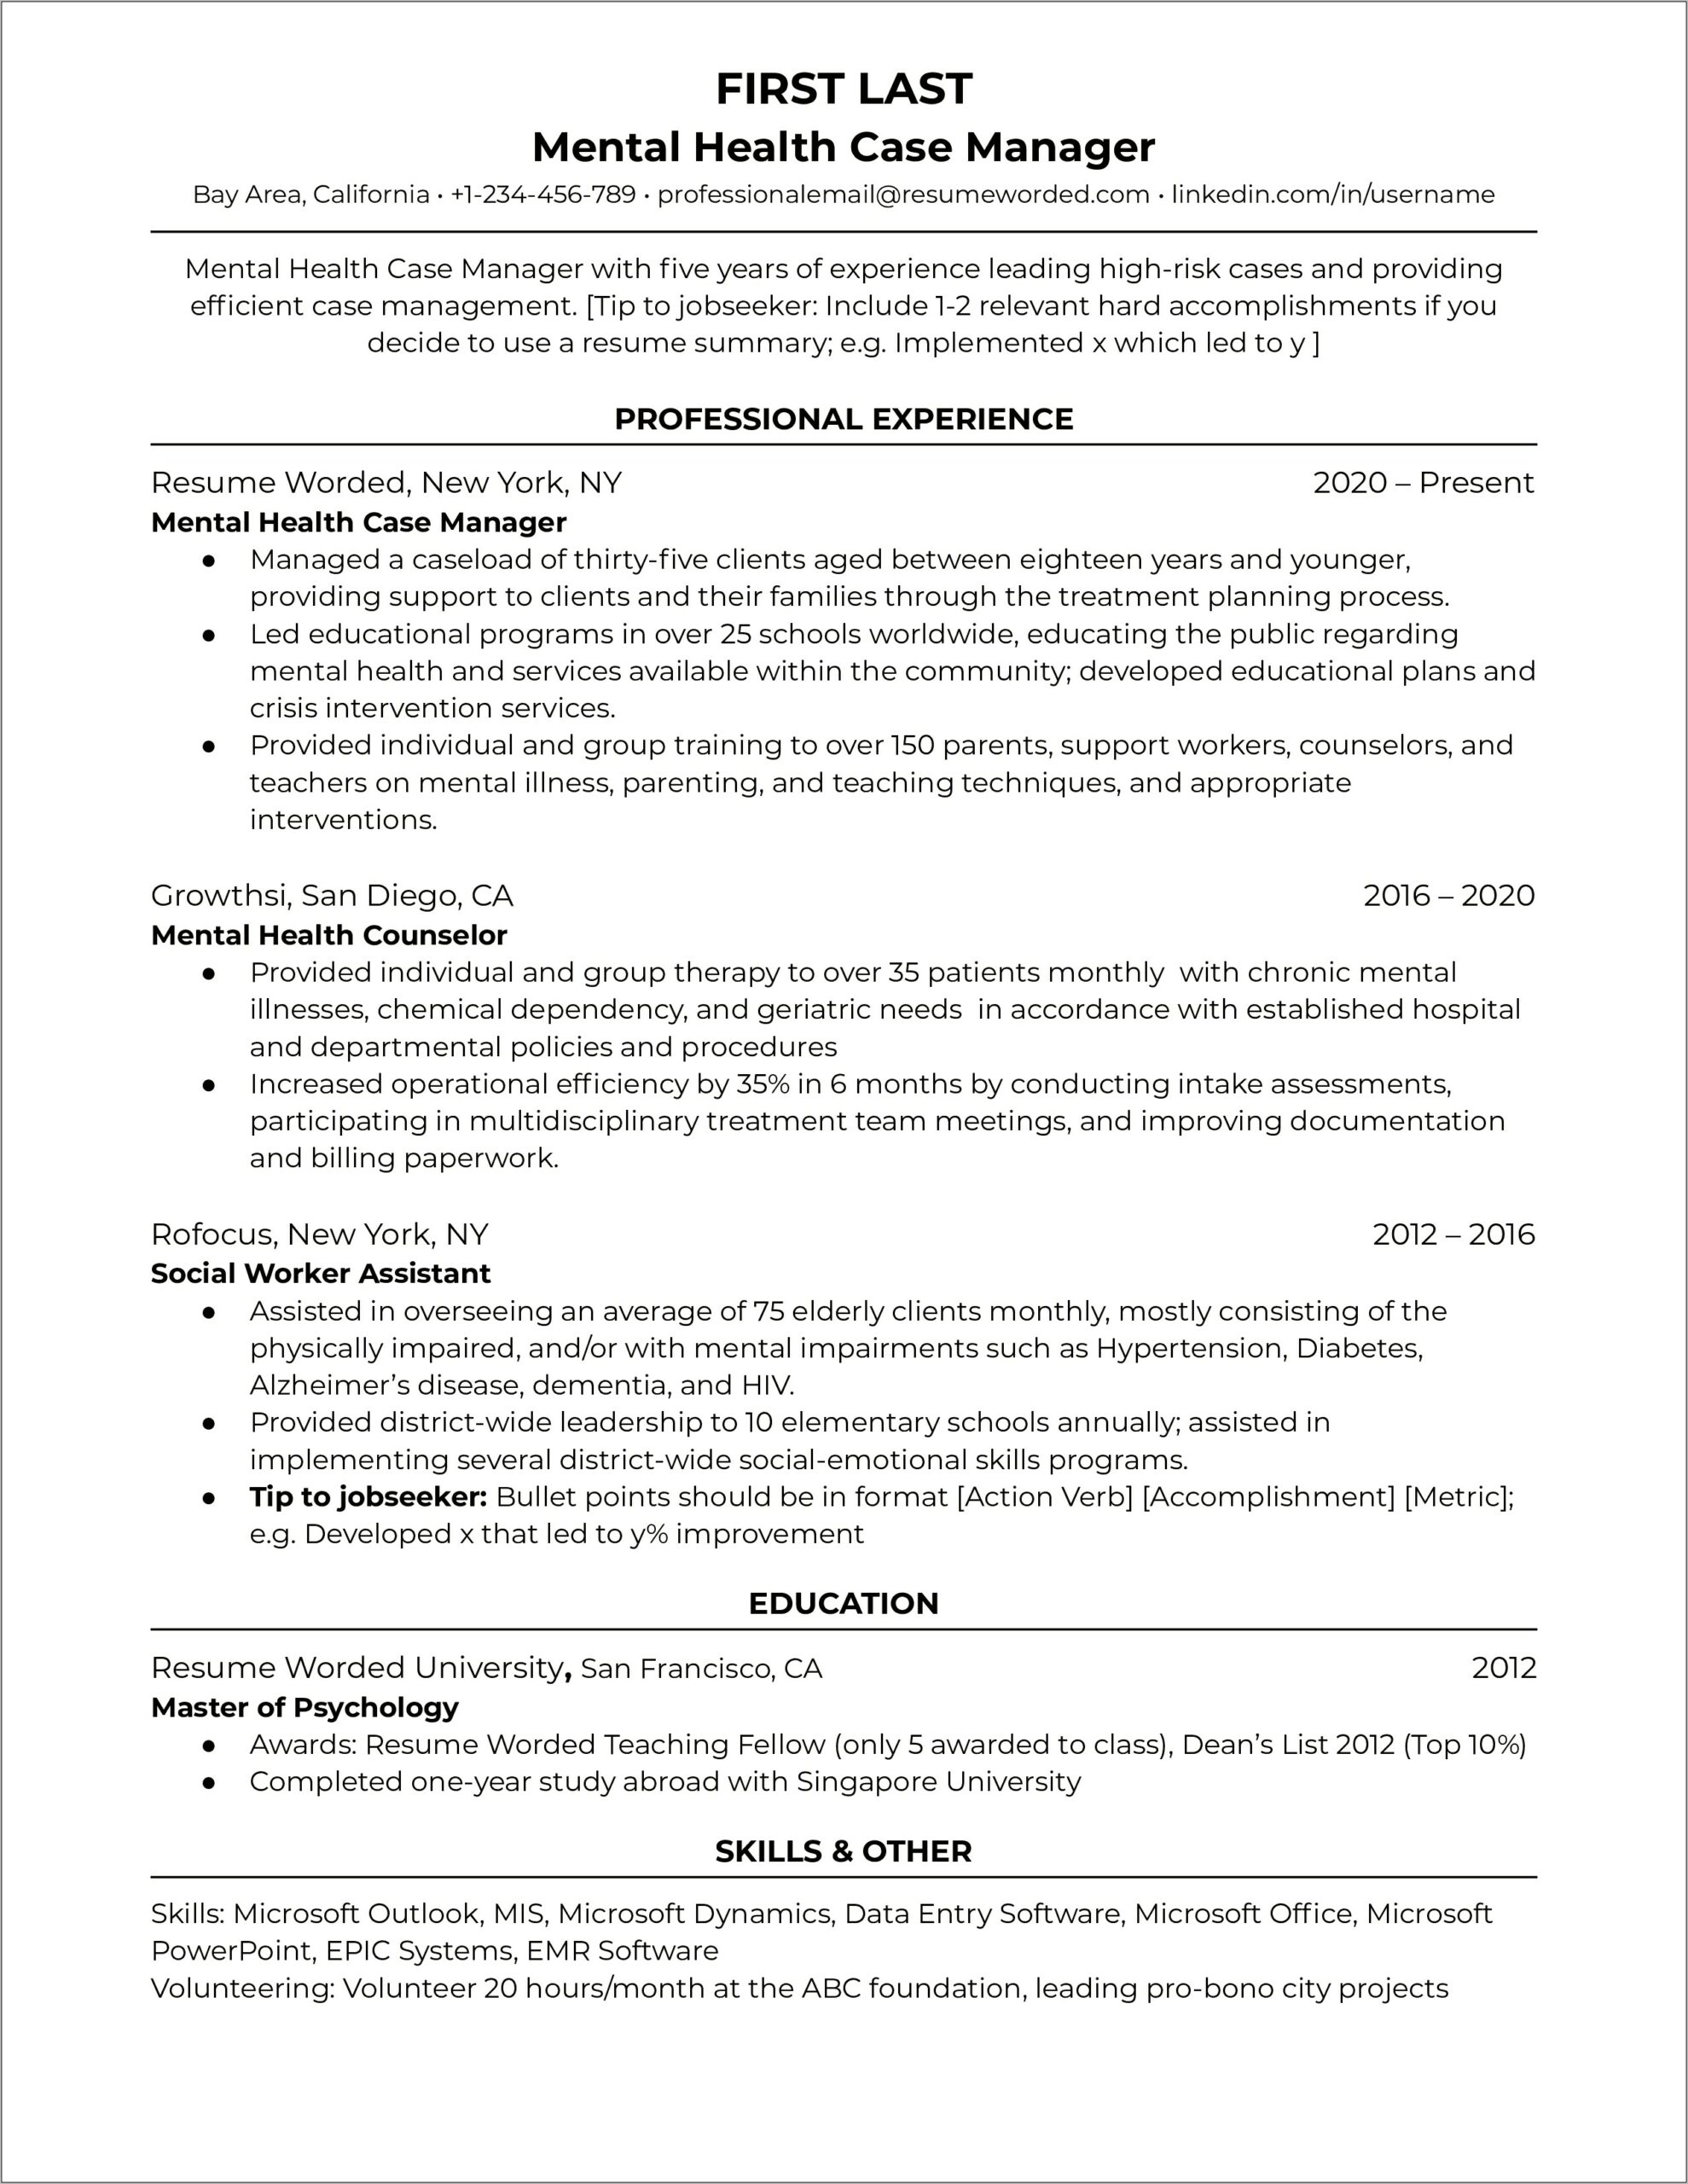 Resume Free For Mental Health